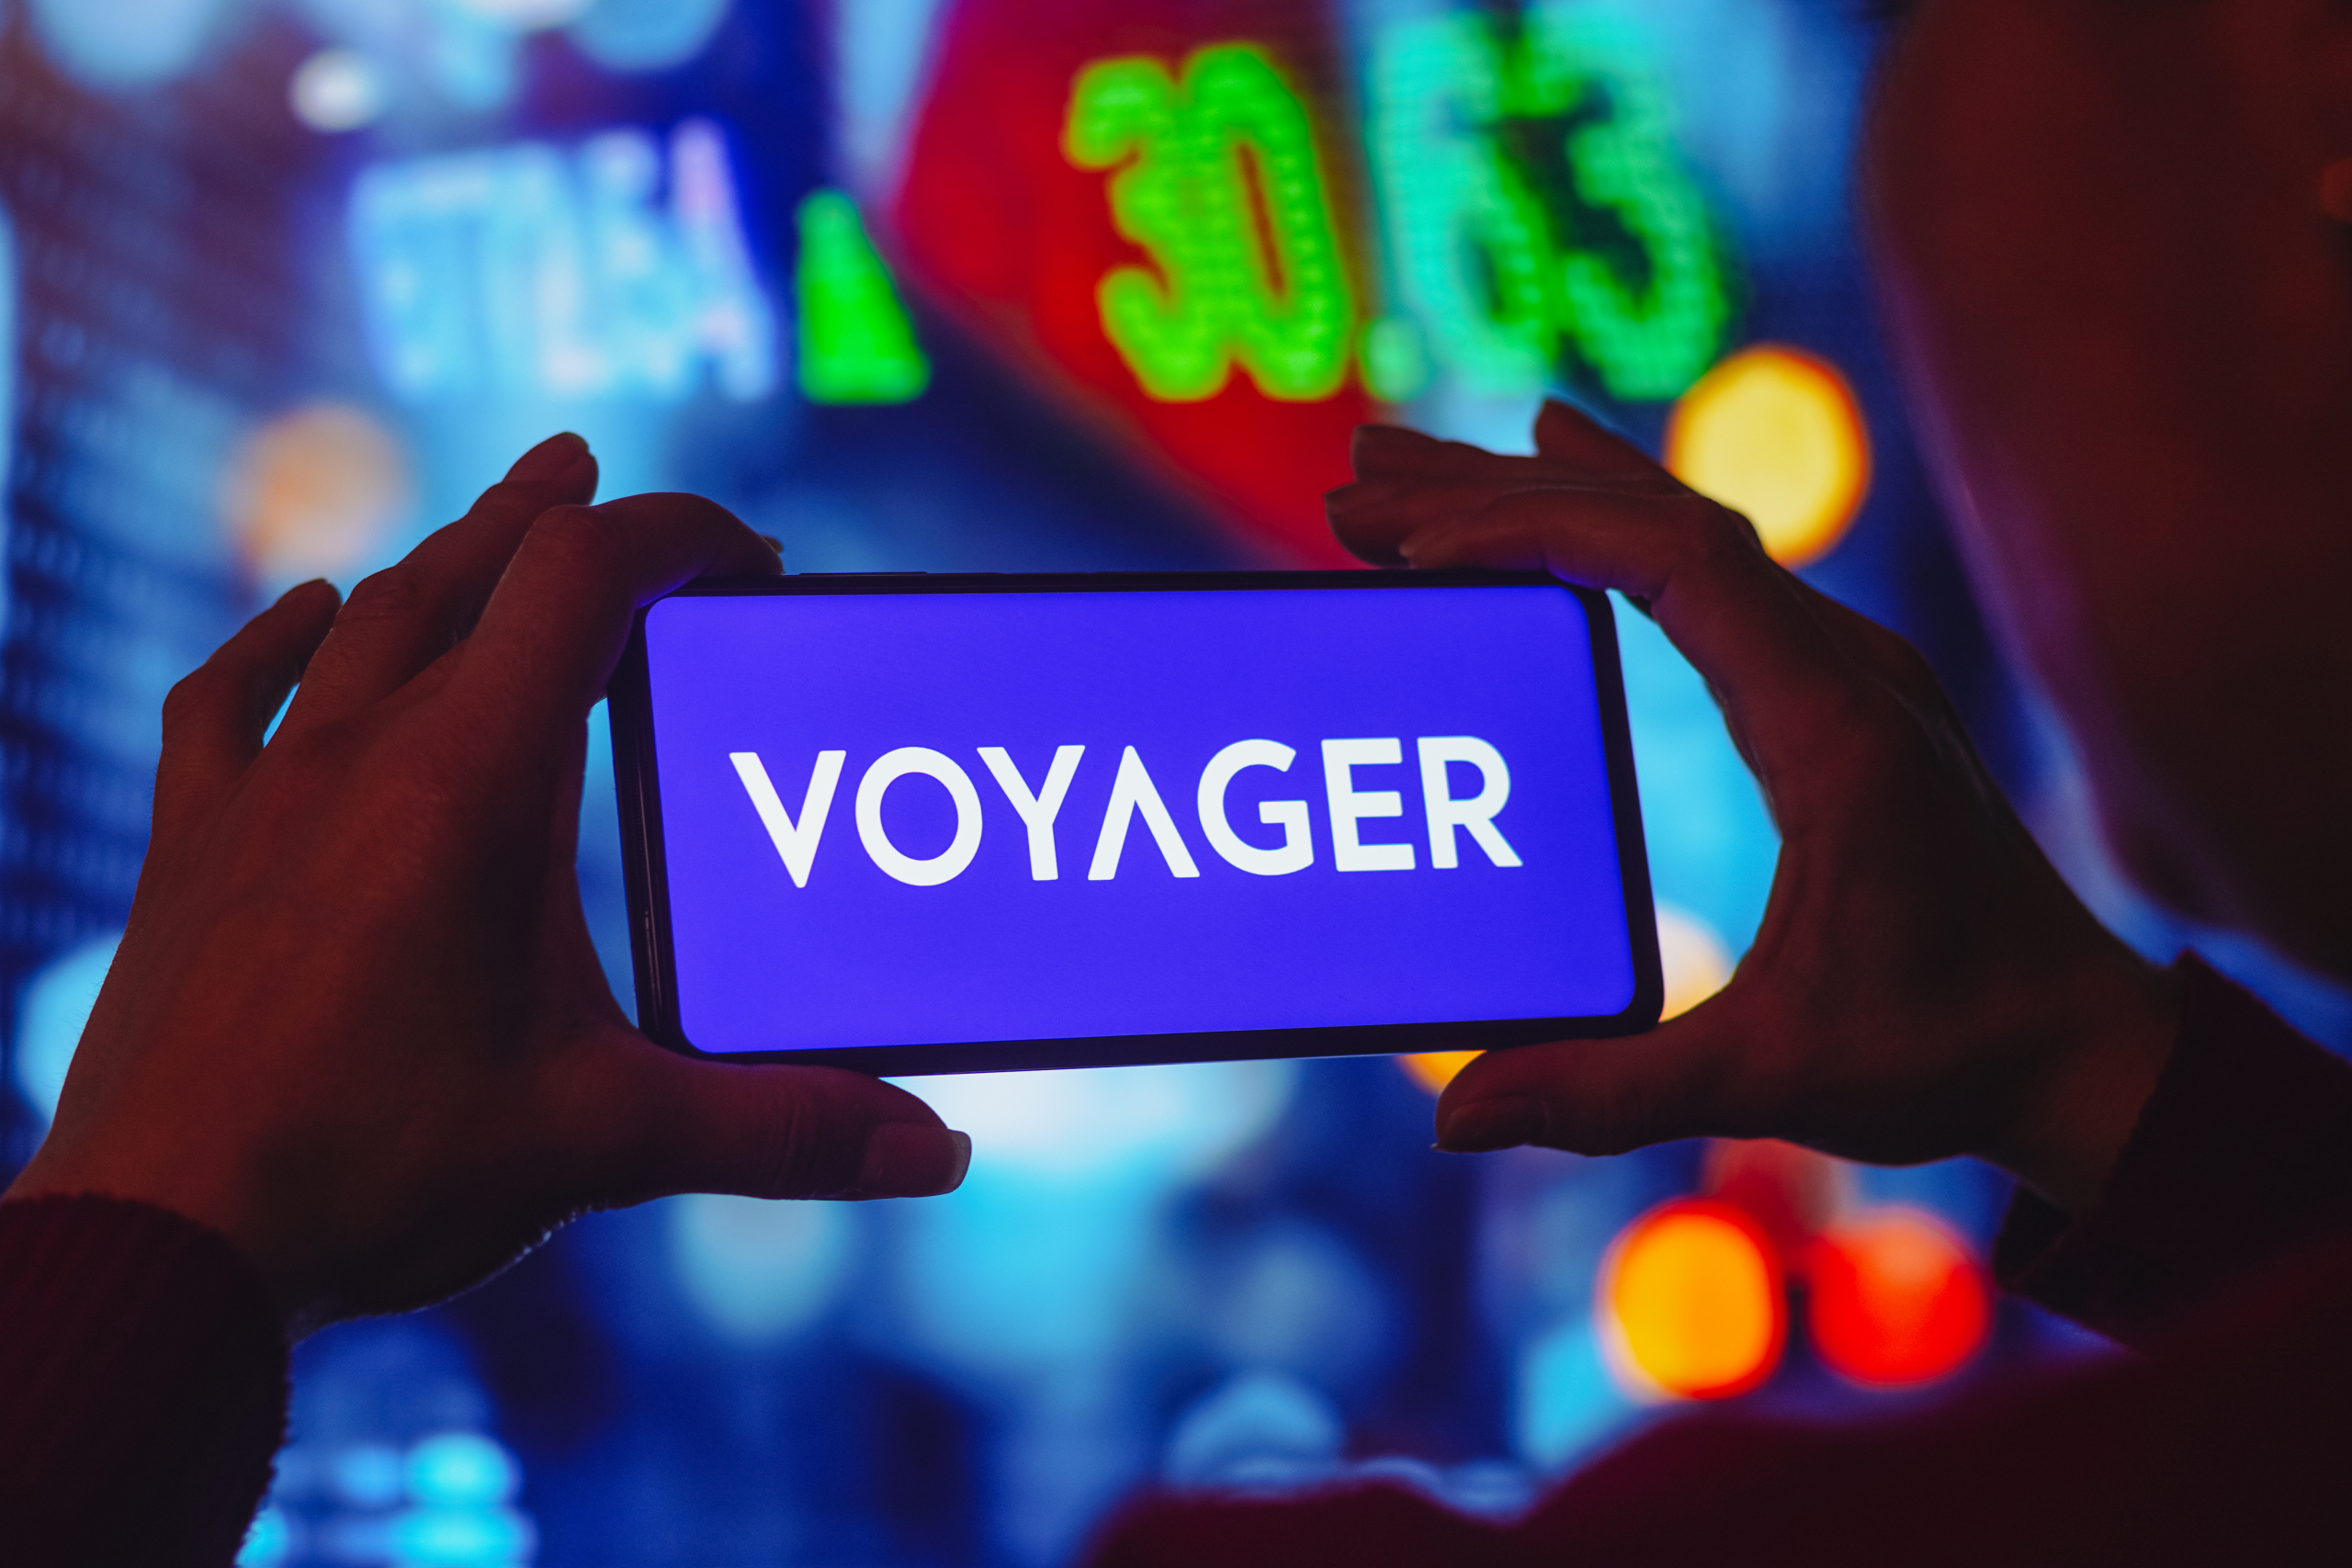 Data suggests that Voyager is selling crypto assets through Coinbase
